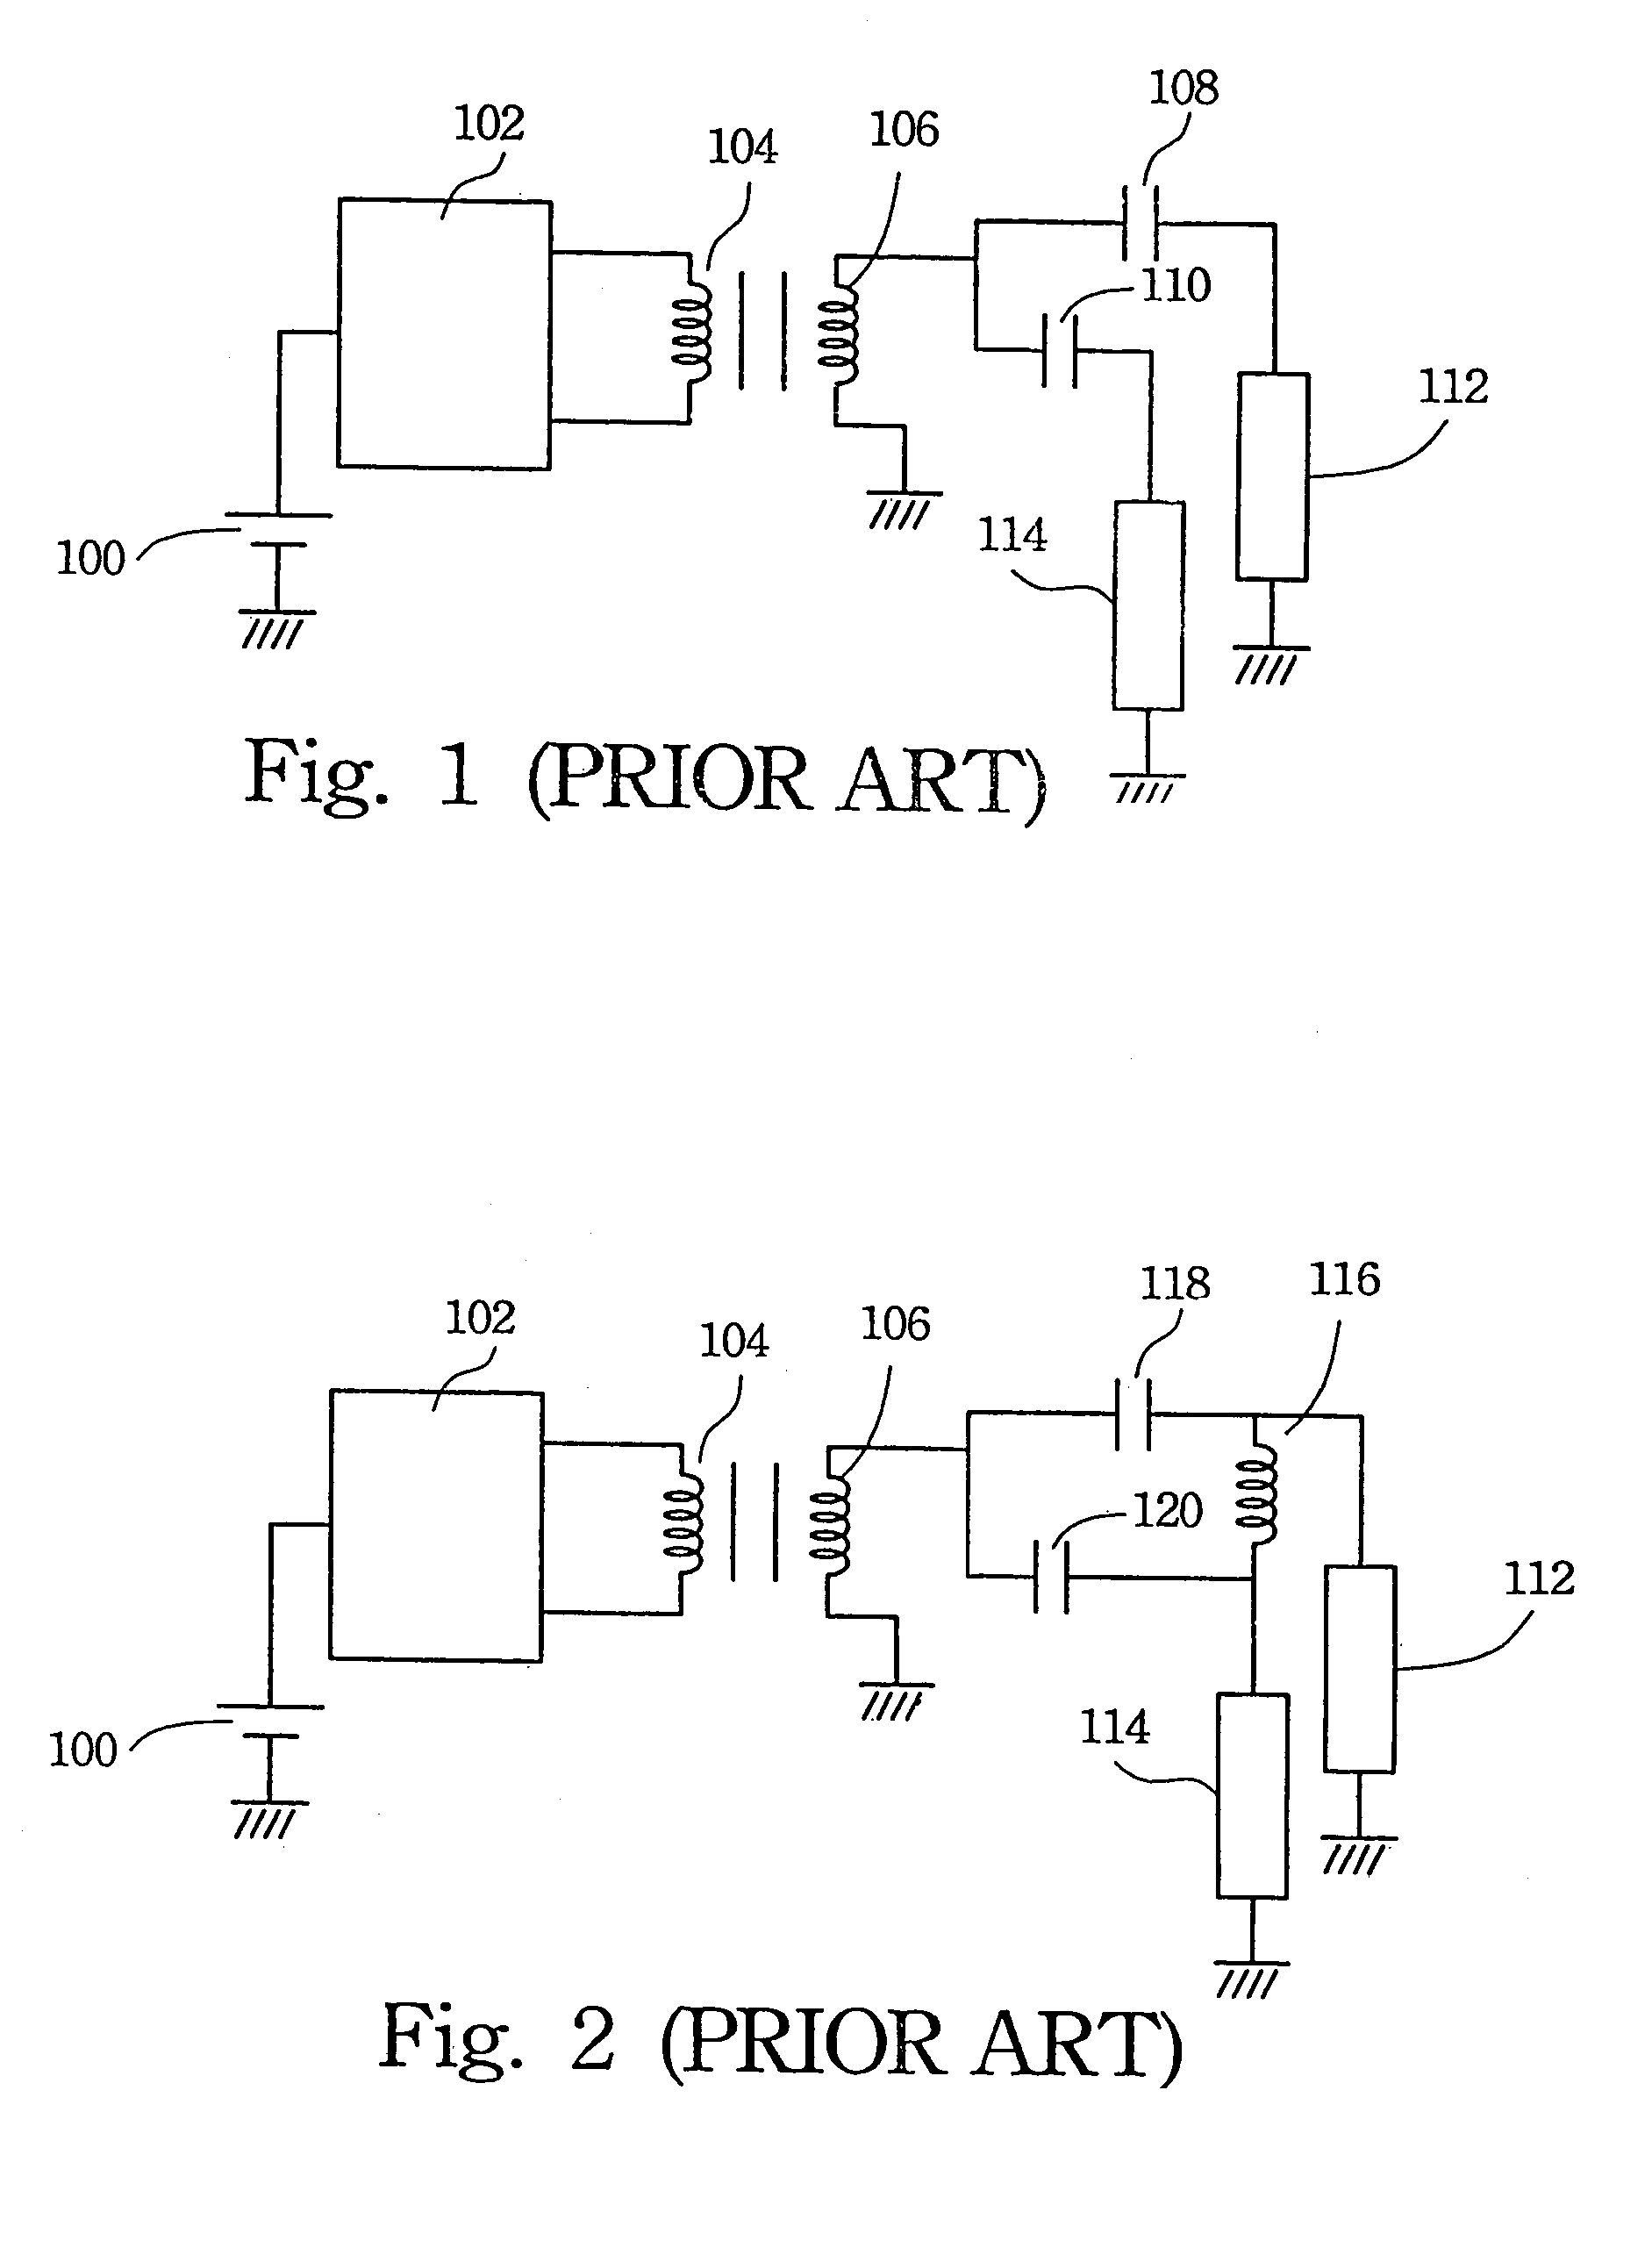 Circuit structure for driving a plurality of cold cathode fluorescent lamps